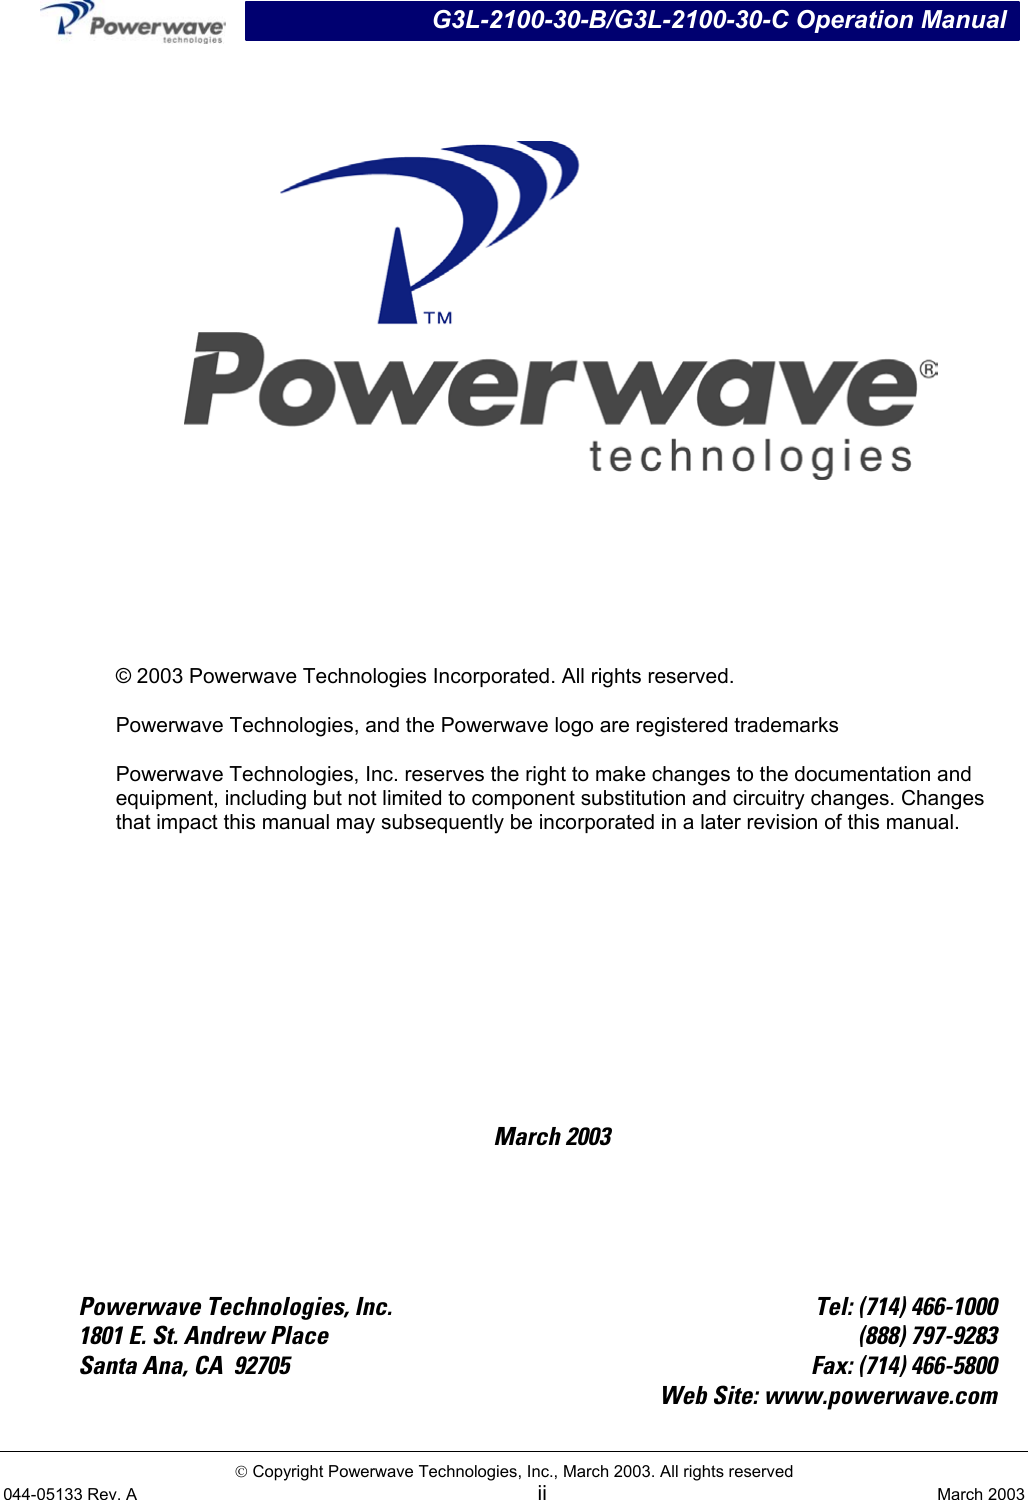 G3L-2100-30-B/G3L-2100-30-C Operation Manual        © 2003 Powerwave Technologies Incorporated. All rights reserved. Powerwave Technologies, and the Powerwave logo are registered trademarks Powerwave Technologies, Inc. reserves the right to make changes to the documentation and equipment, including but not limited to component substitution and circuitry changes. Changes that impact this manual may subsequently be incorporated in a later revision of this manual.      March 2003      Powerwave Technologies, Inc.  Tel: (714) 466-1000 1801 E. St. Andrew Place  (888) 797-9283 Santa Ana, CA  92705  Fax: (714) 466-5800   Web Site: www.powerwave.com  Copyright Powerwave Technologies, Inc., March 2003. All rights reserved 044-05133 Rev. A ii  March 2003  